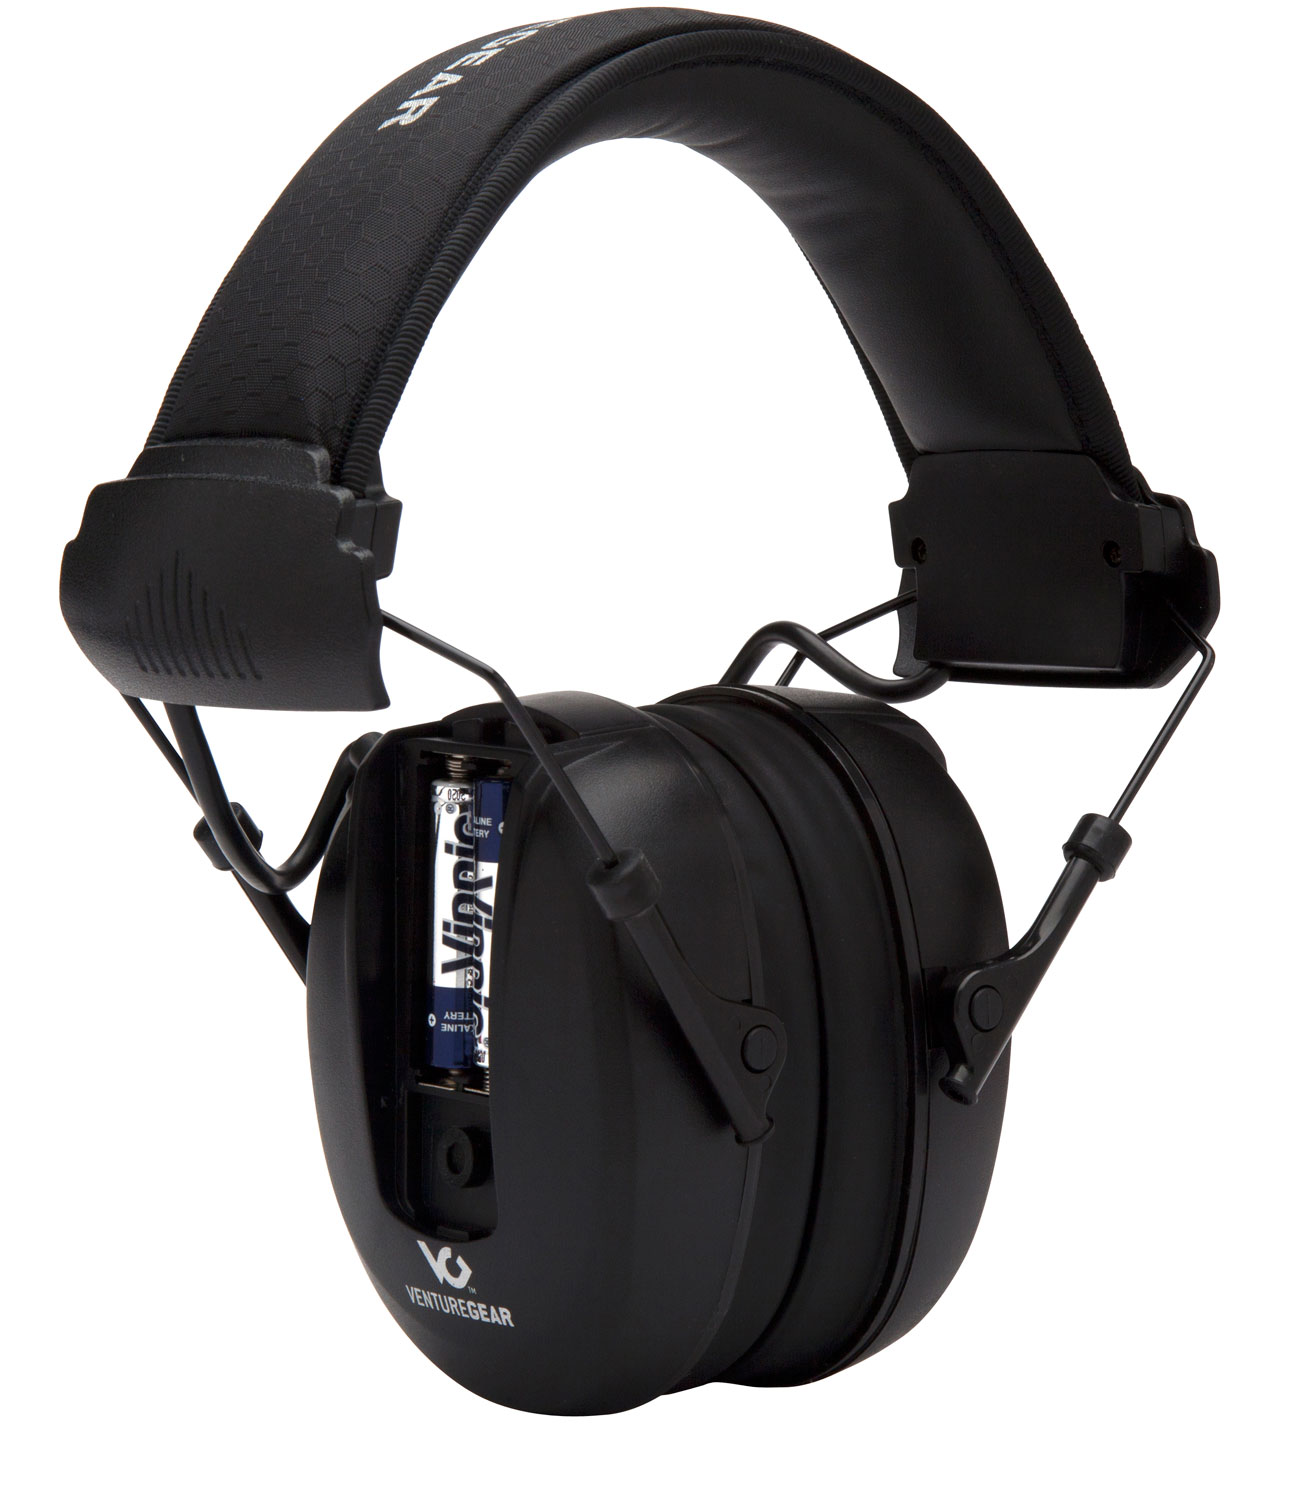 Pyramex VGPME10 Venture Gear Clandestine Electronic Muff 24 dB Over the Head Slim Profile Black Ear Cups with Black Headband for Adults 1 Pair Includes 2 AAA Batteries